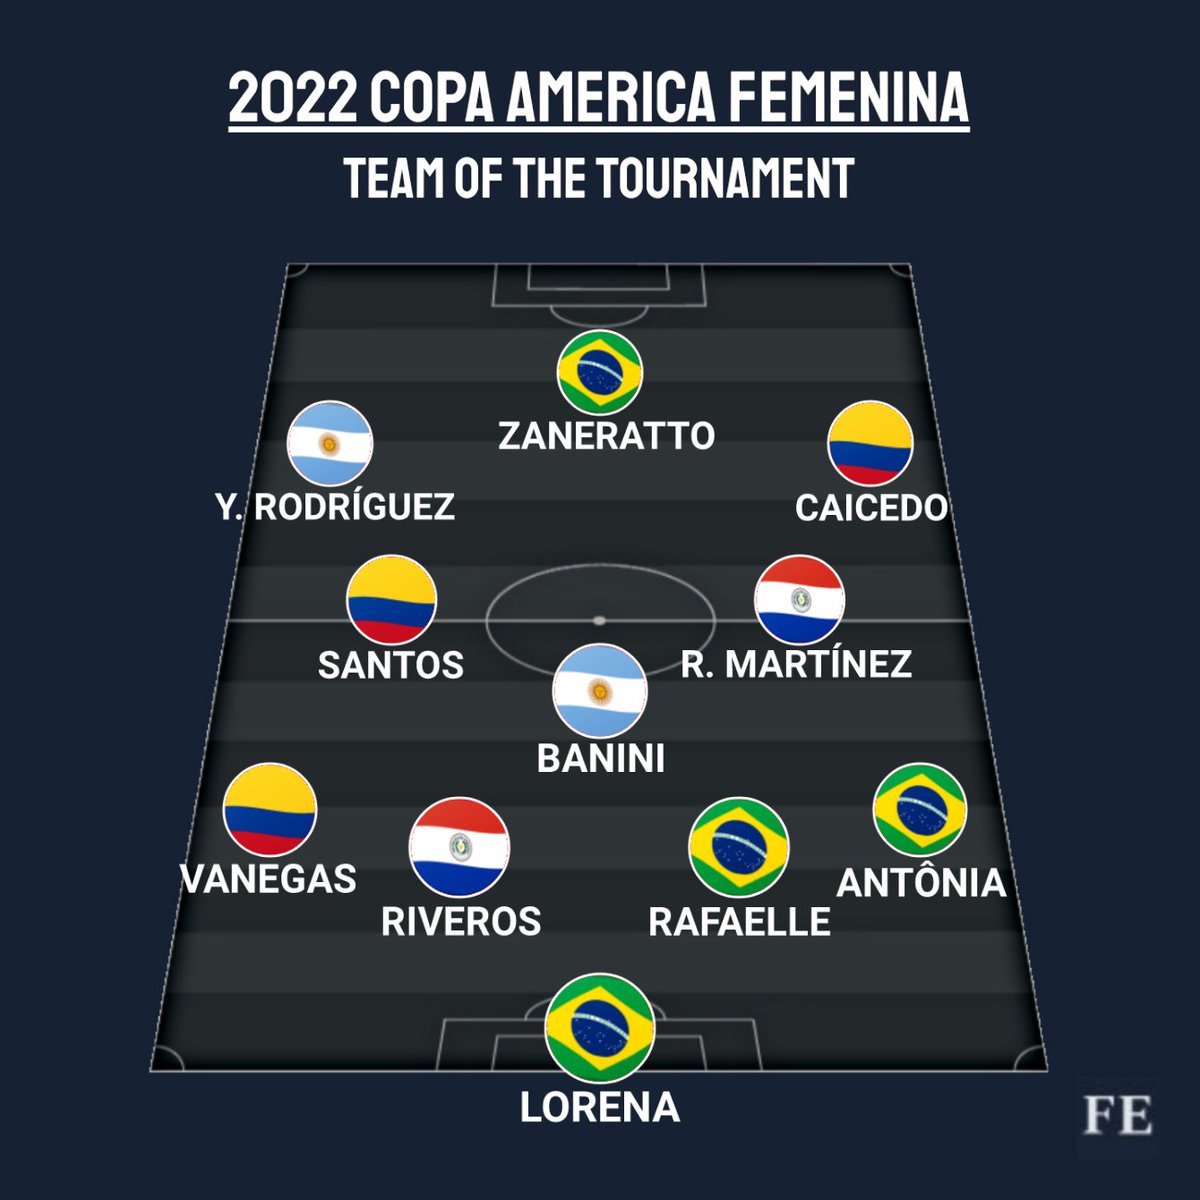 🌟TEAM OF THE TOURNAMENT🌟
Here is our team of the tournament for the #CopaAmericaFemenina 

🥇Brazil wins without conceding a goal
🥈Caicedo's Colombia returns to the WWC
🥉Argentina shines with Yami
🏅Paraguay goes to WWC Intercontinental Playoffs

What changes would you make?